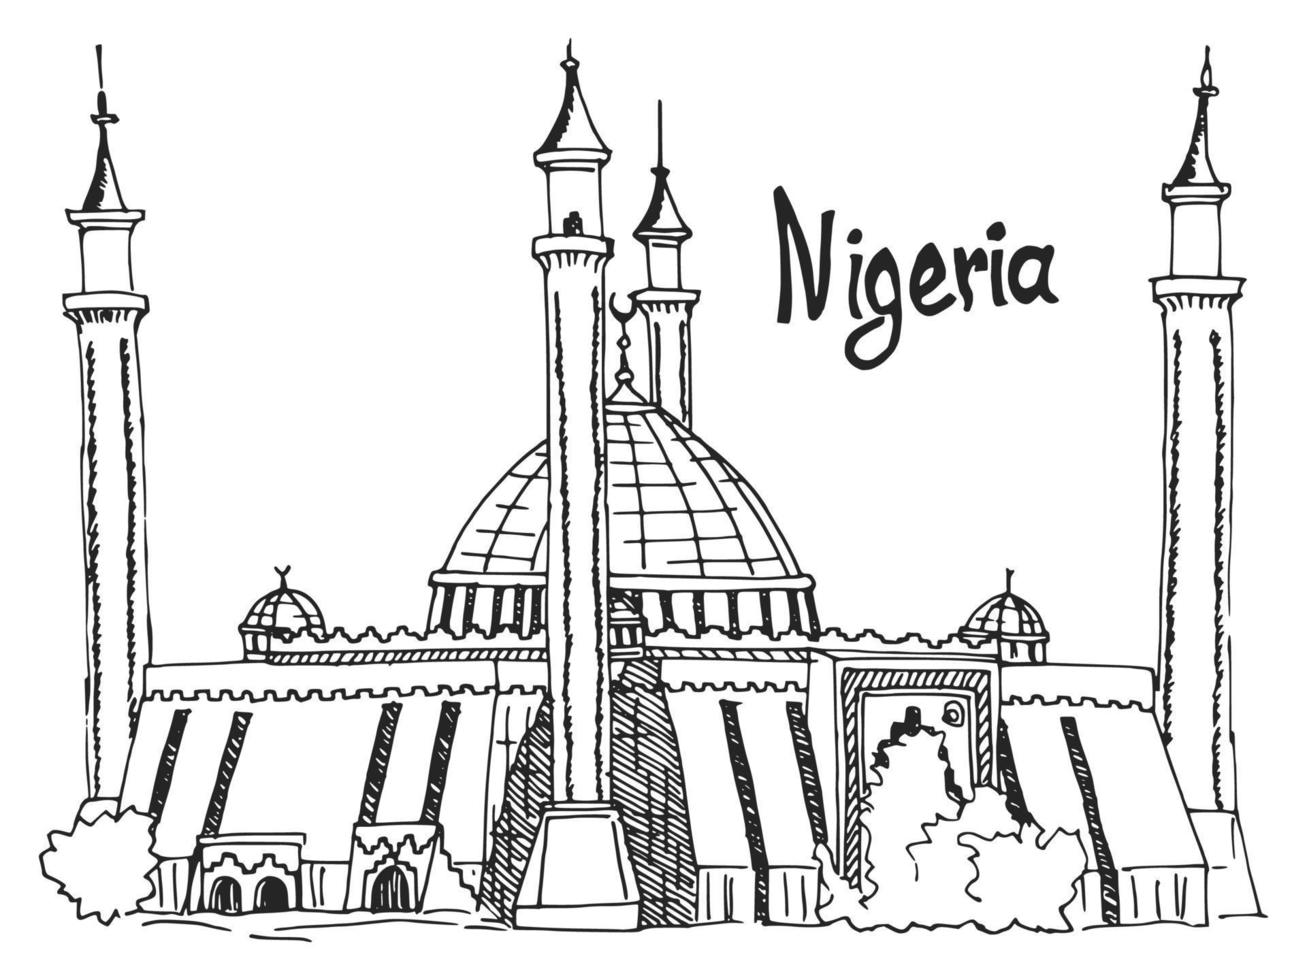 old mosque in nigeria postcard for tourism advertisement vector